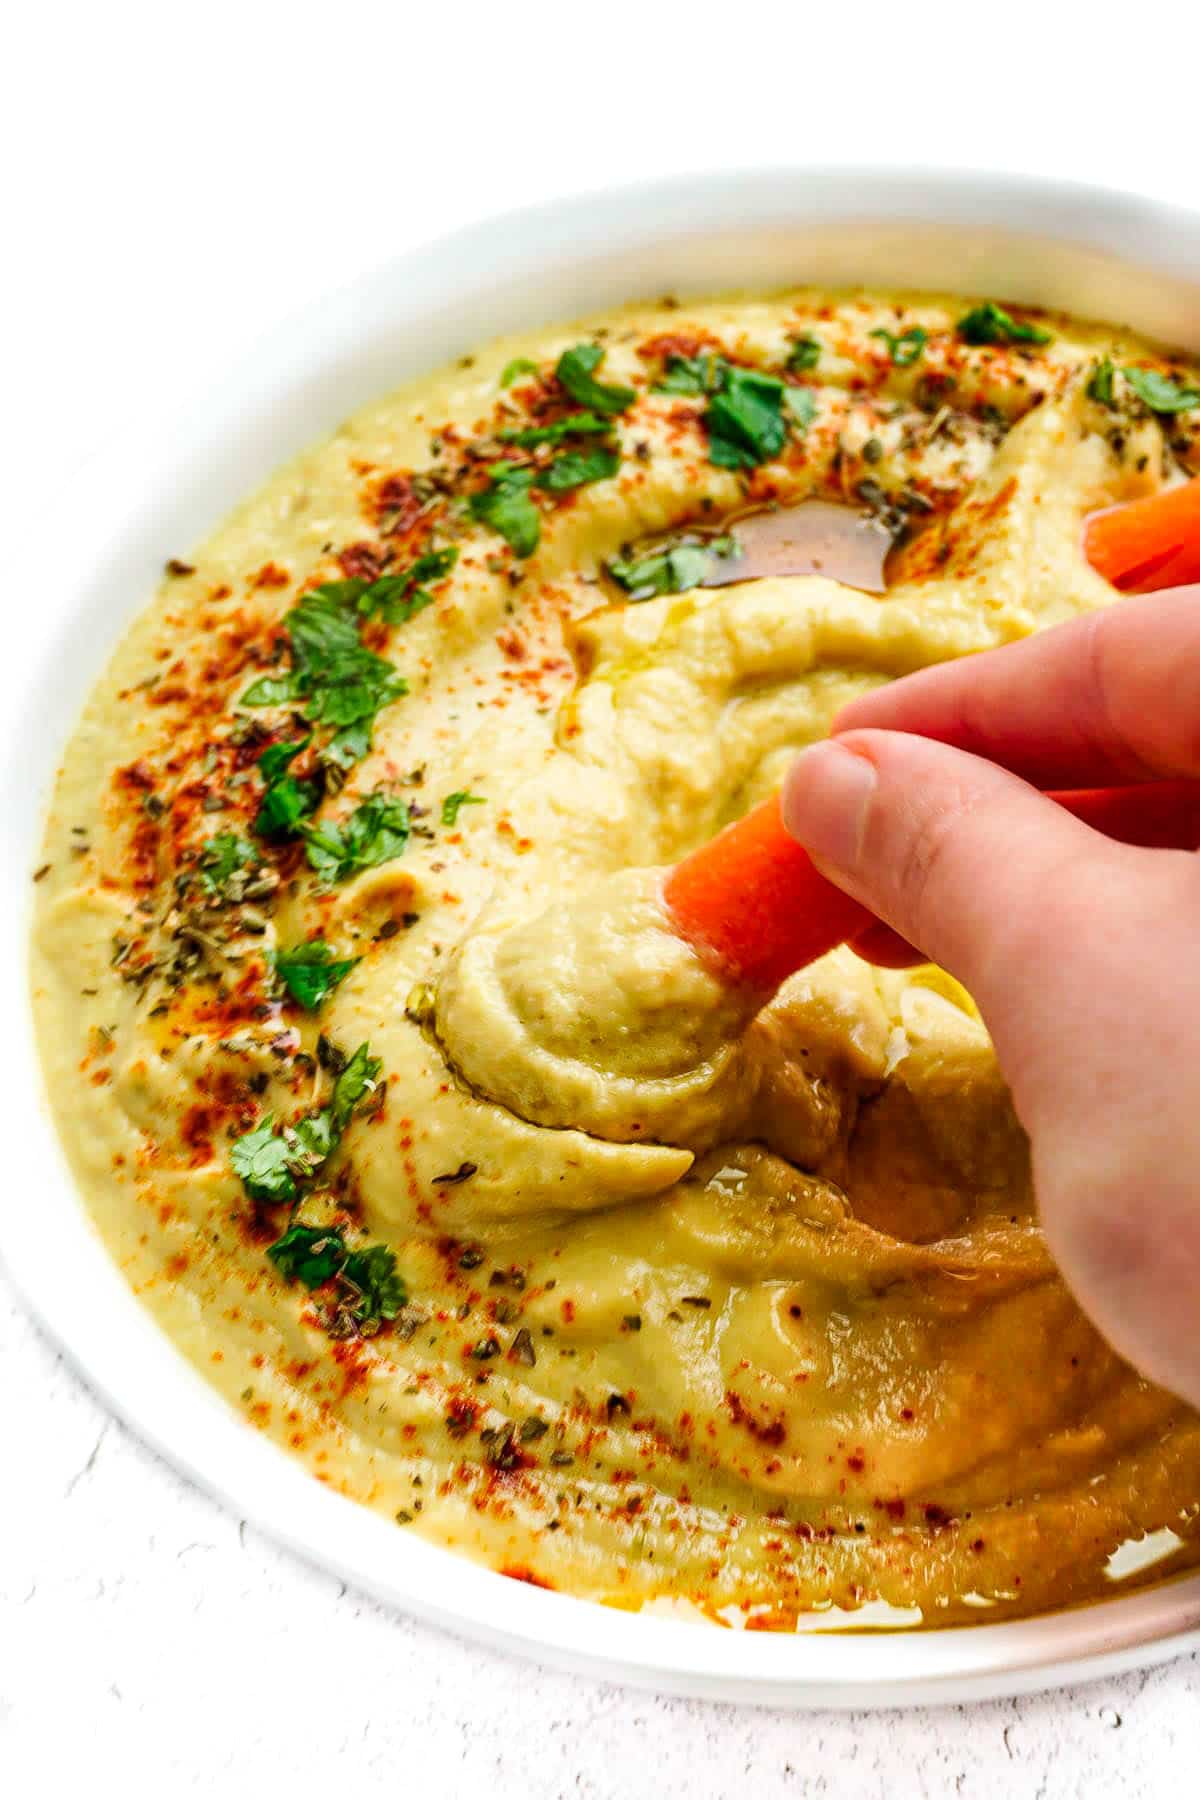 A hand dipping a baby carrot into the Zucchini Hummus.